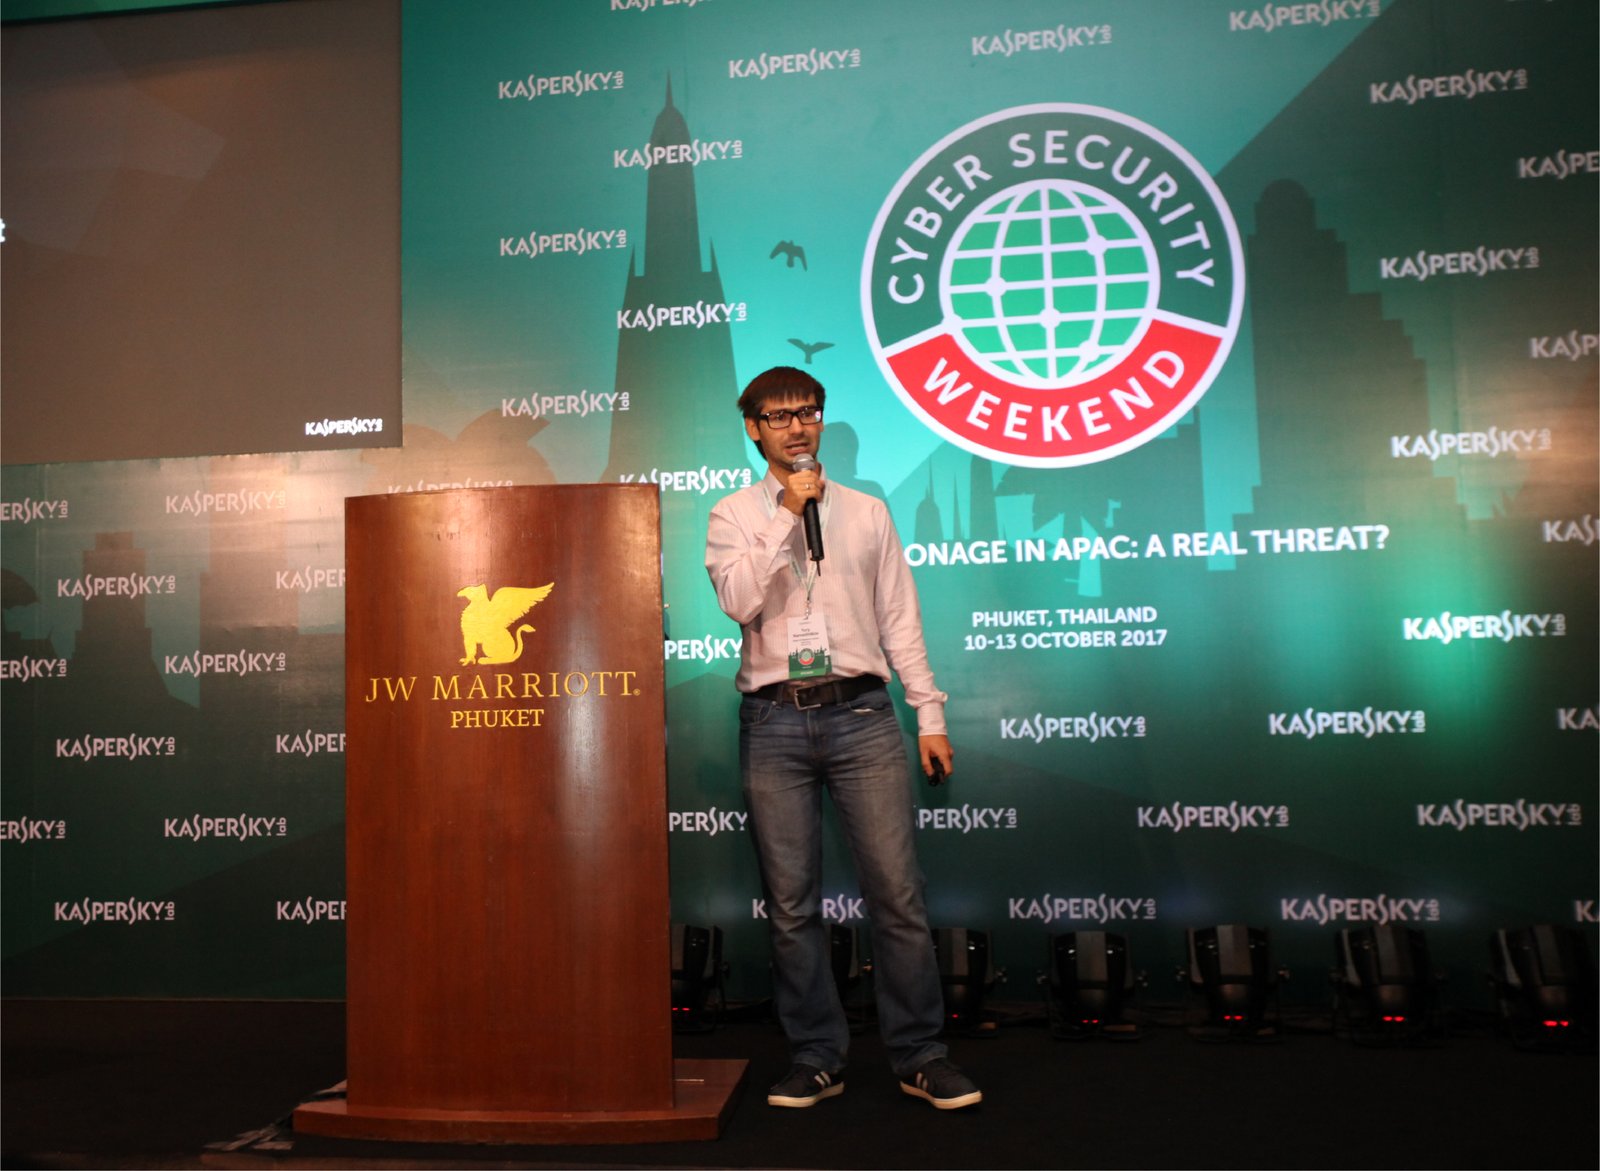 Cyber-spy Groups are moving towards using supply chain attacks and legitimate tools to attack financial institutions, warns Kaspersky Lab